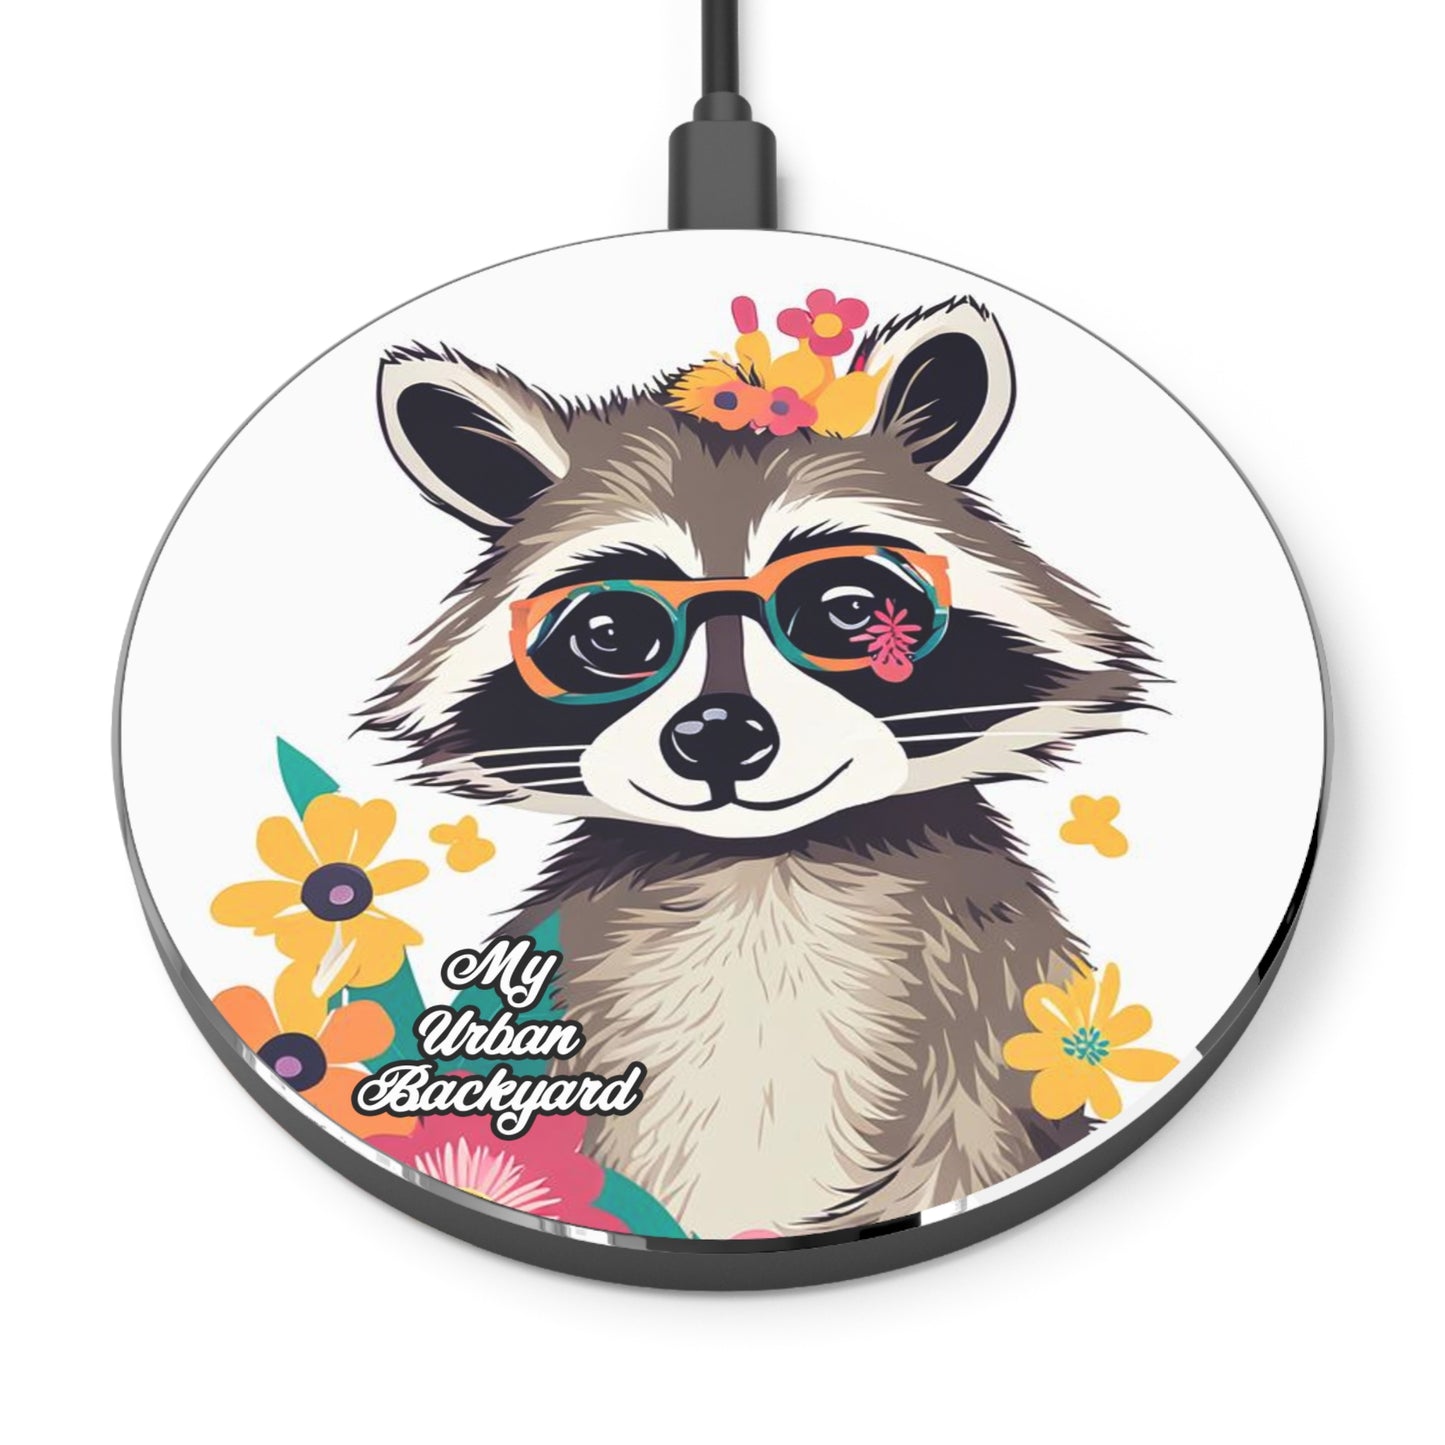 Raccoon with Glasses, 10W Wireless Charger for iPhone, Android, Earbuds